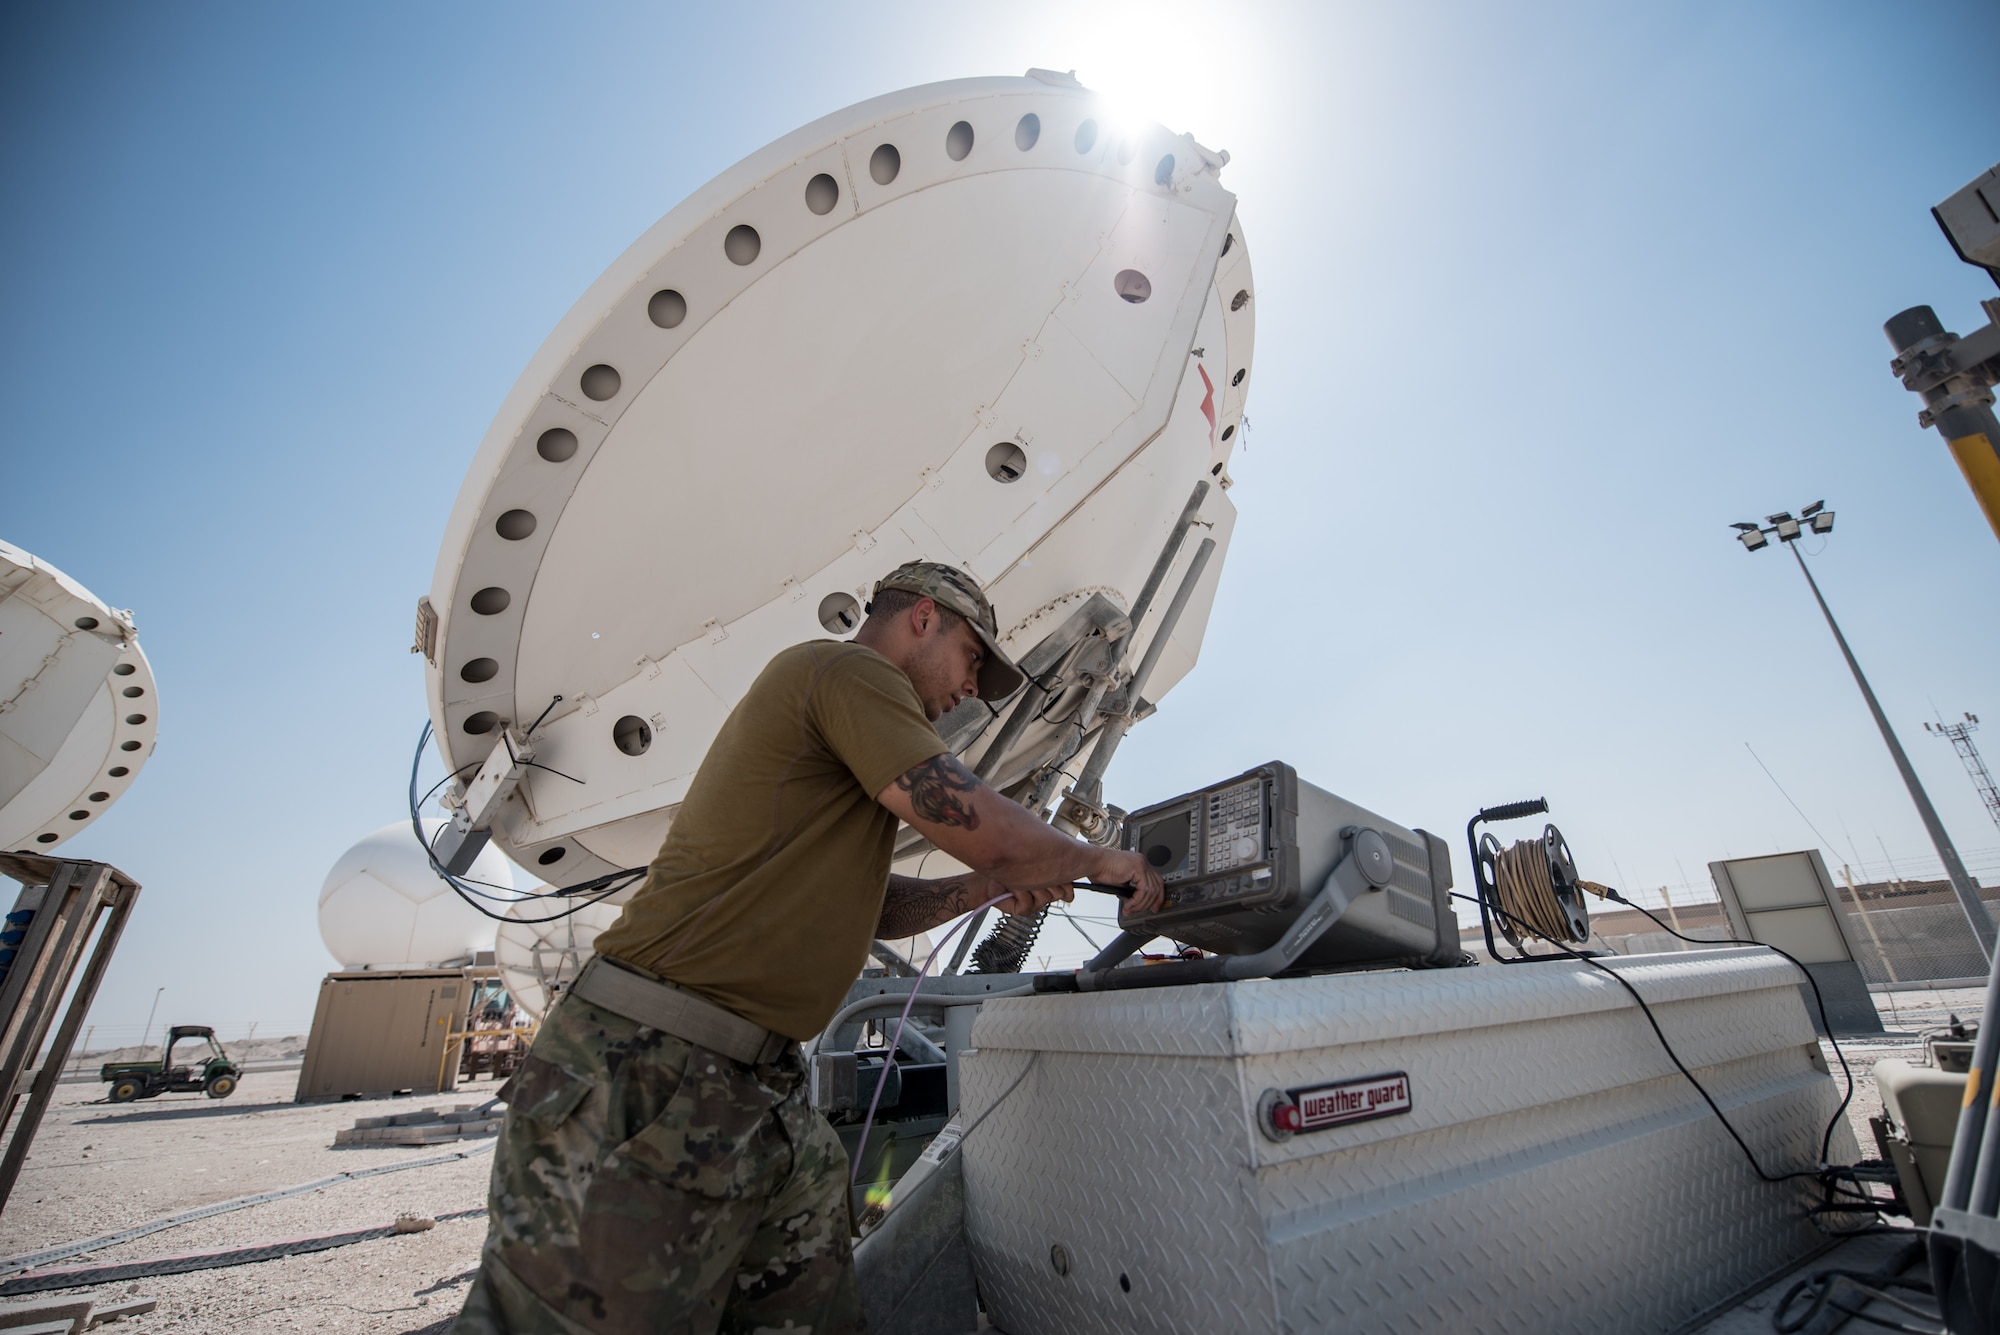 U.S. Air Force Staff Sgt. Joshua Foster, a radio frequency transmissions technician with the 379th Operations Support Squadron, uses a spectrum analyzer to perform diagnostics on a satellite at Al Udeid Air Base, Qatar, Mar. 30, 2018. Silent Sentry protects critical satellite communication links by employing multiple weapons systems for electronic warfare. (U.S. Air National Guard photo by Master Sgt. Phil Speck)